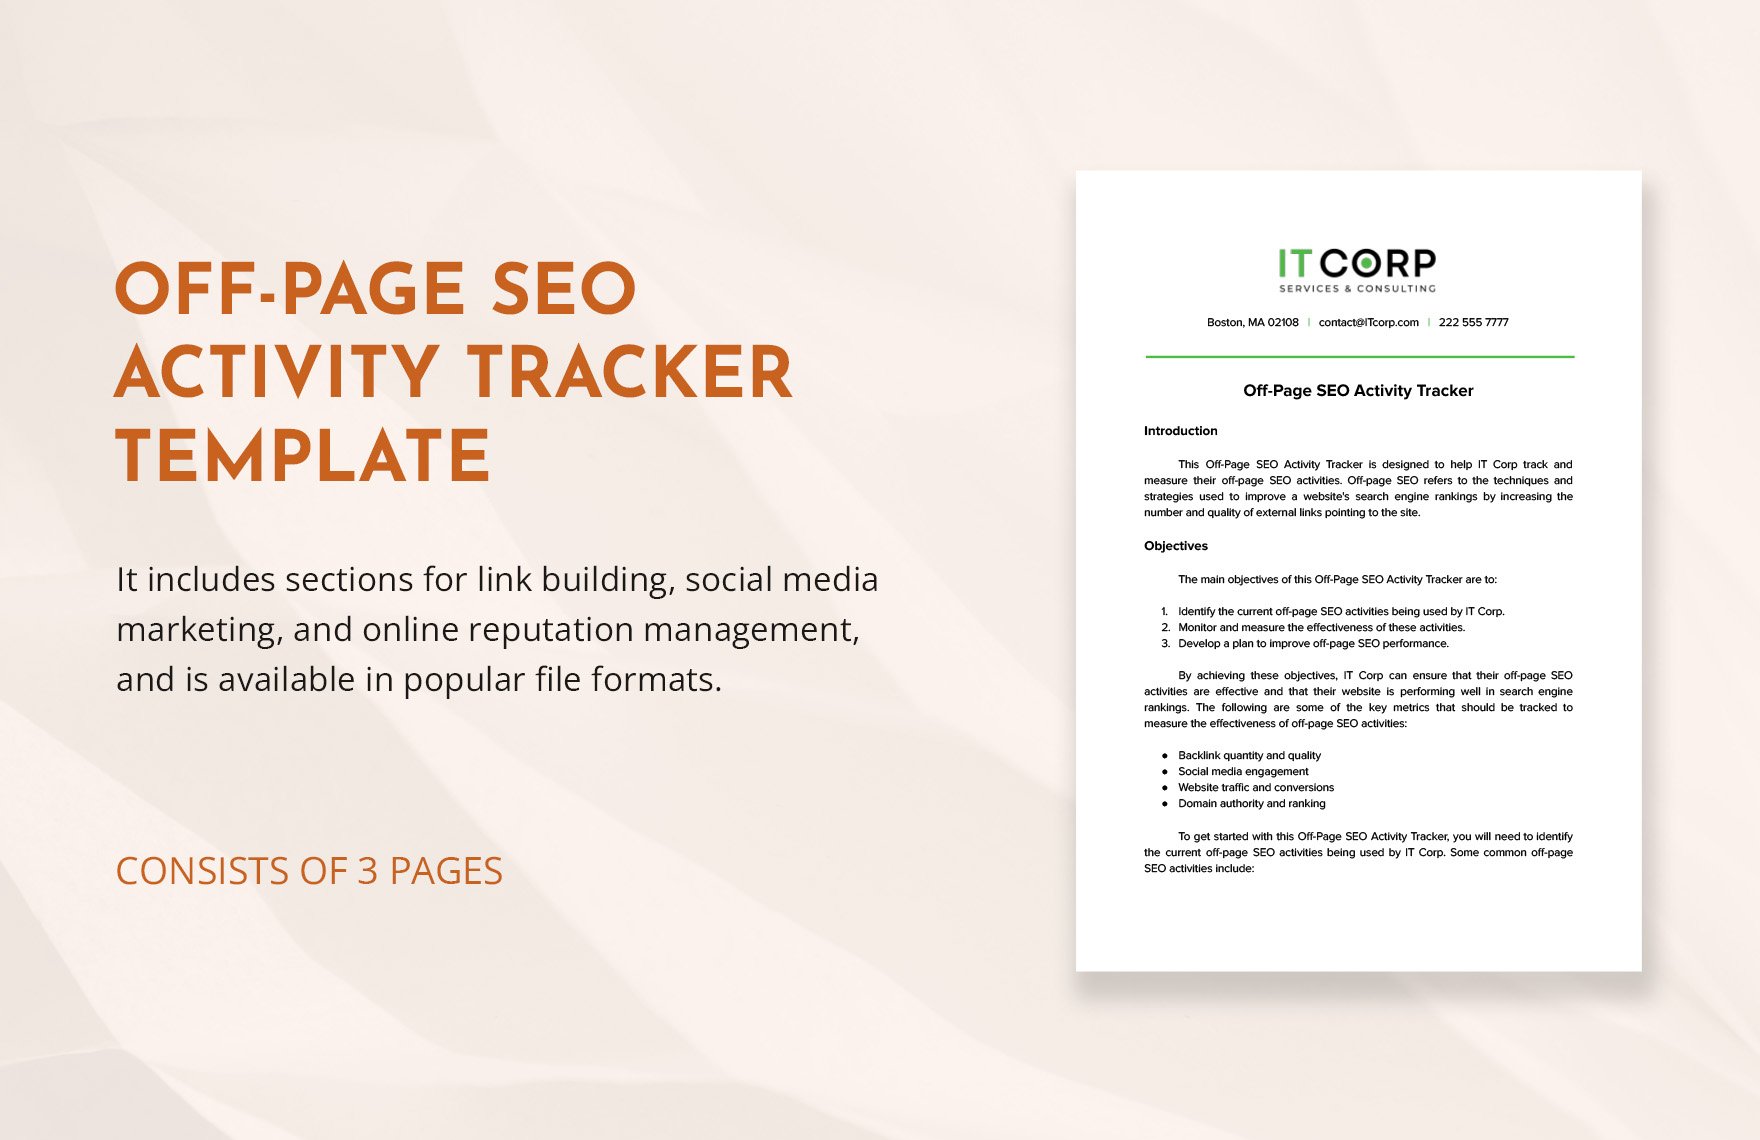 Off-page SEO Activity Tracker Template